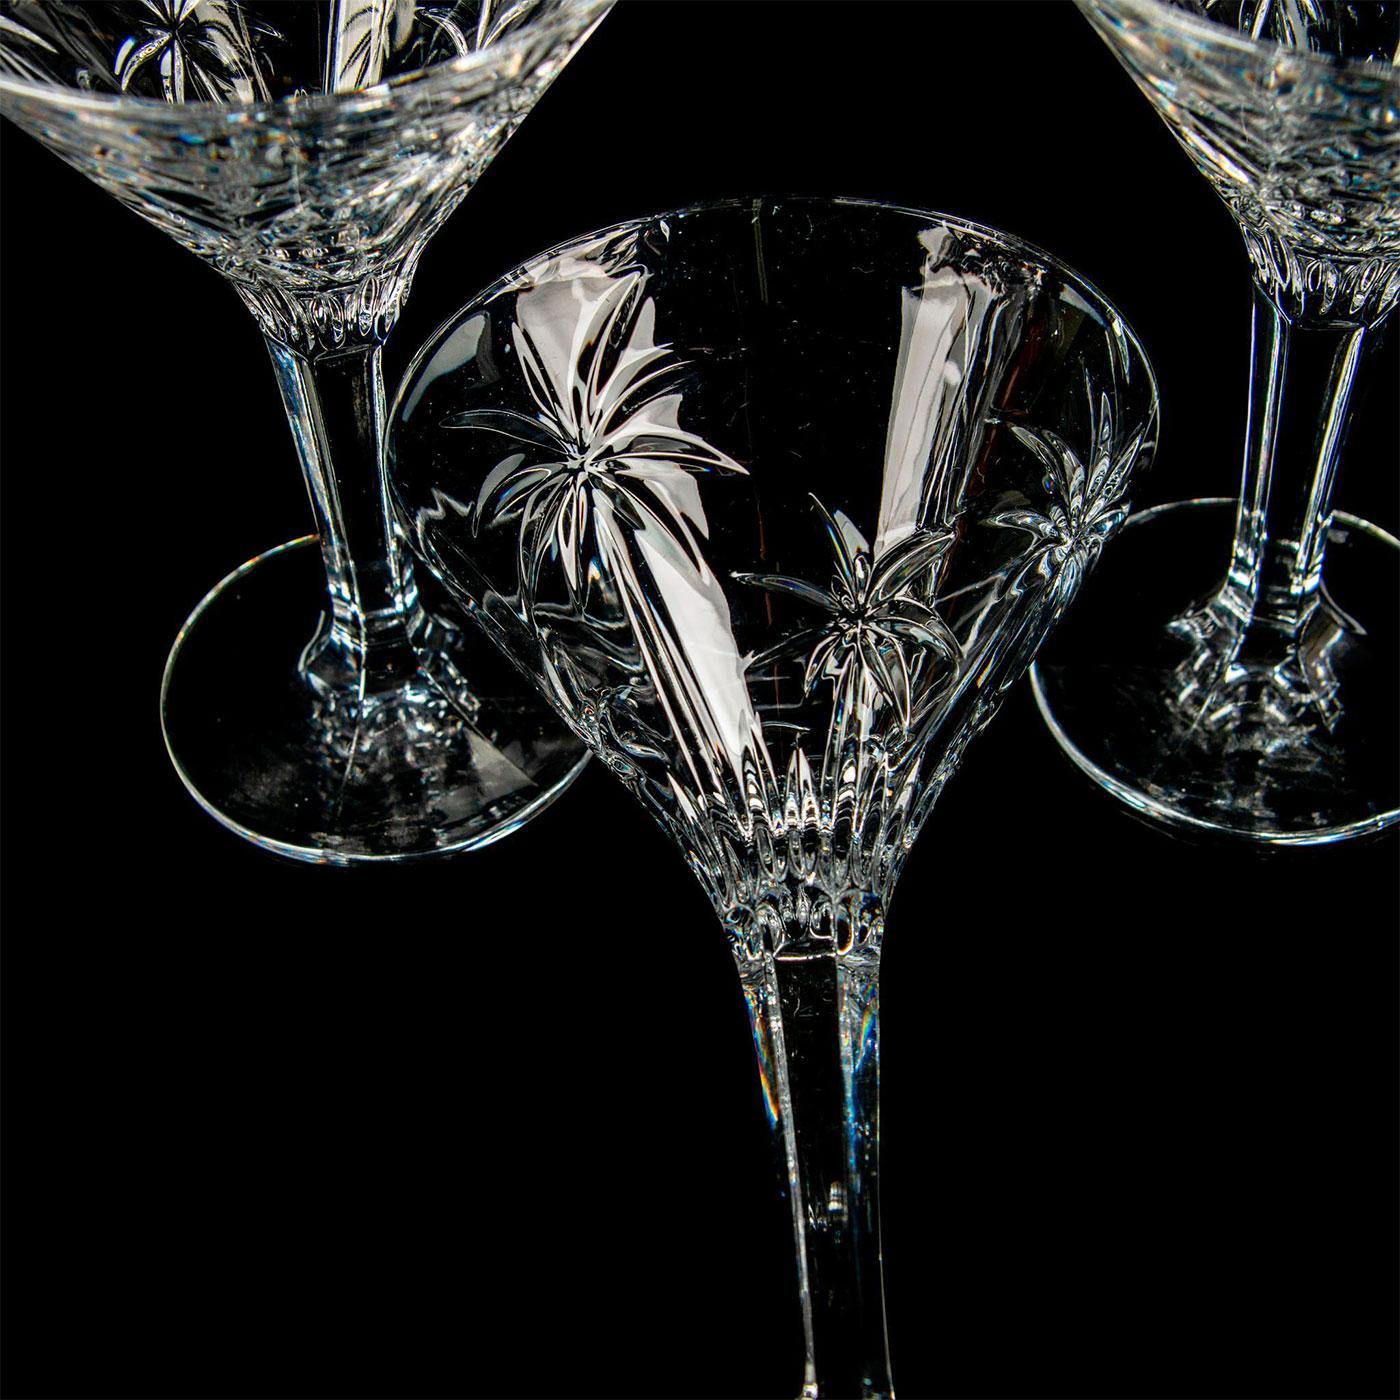 Sold at Auction: 4pc Godinger Shannon Martini Glasses, South Beach Palm